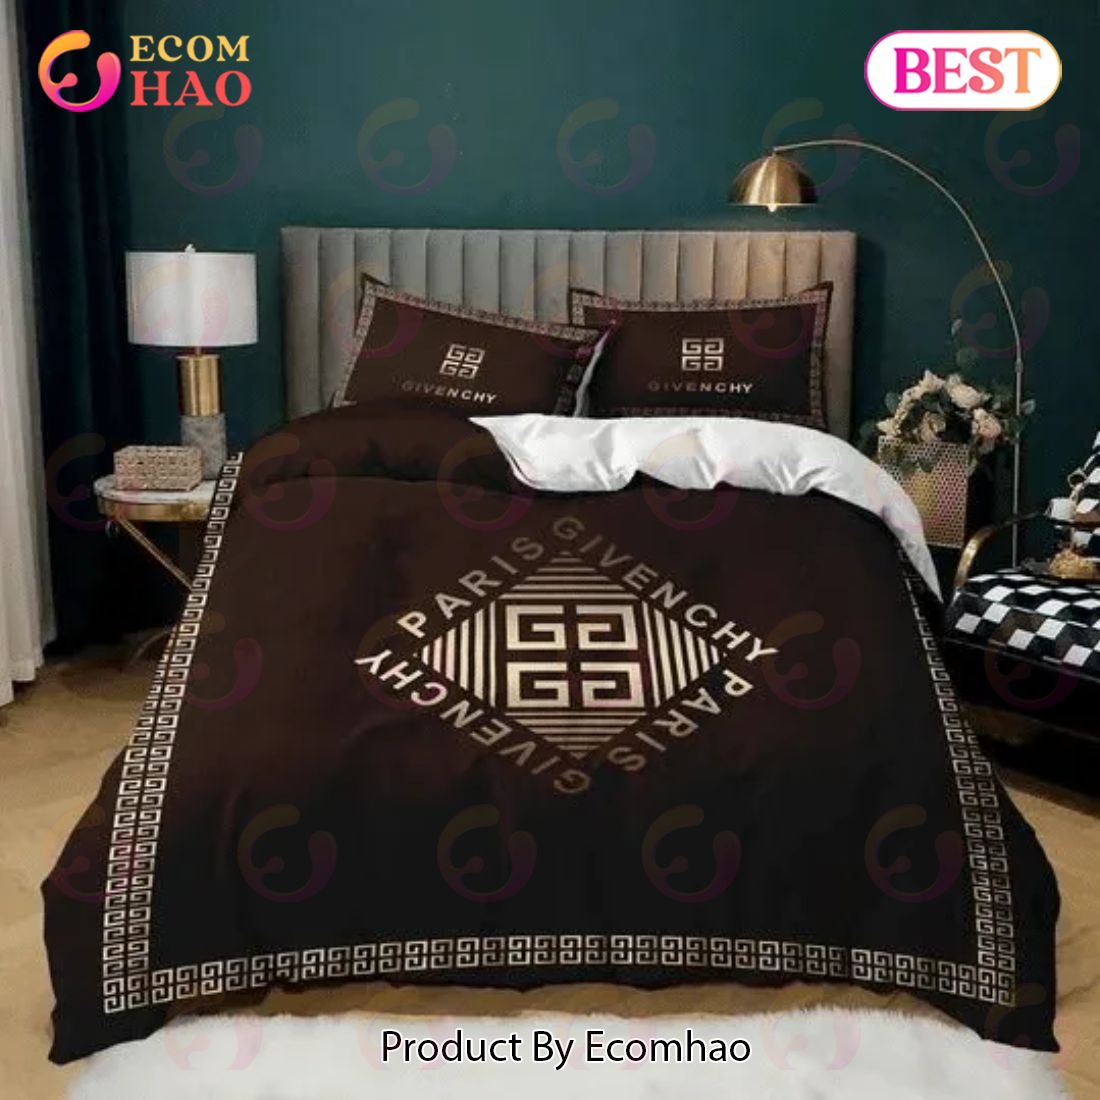 Brown Givenchy Paris Logo Luxury Brand High End Premium Bedding Set For Bedroom Luxury Bedspread Duvet Cover Set With Pillowcases Home Decoration